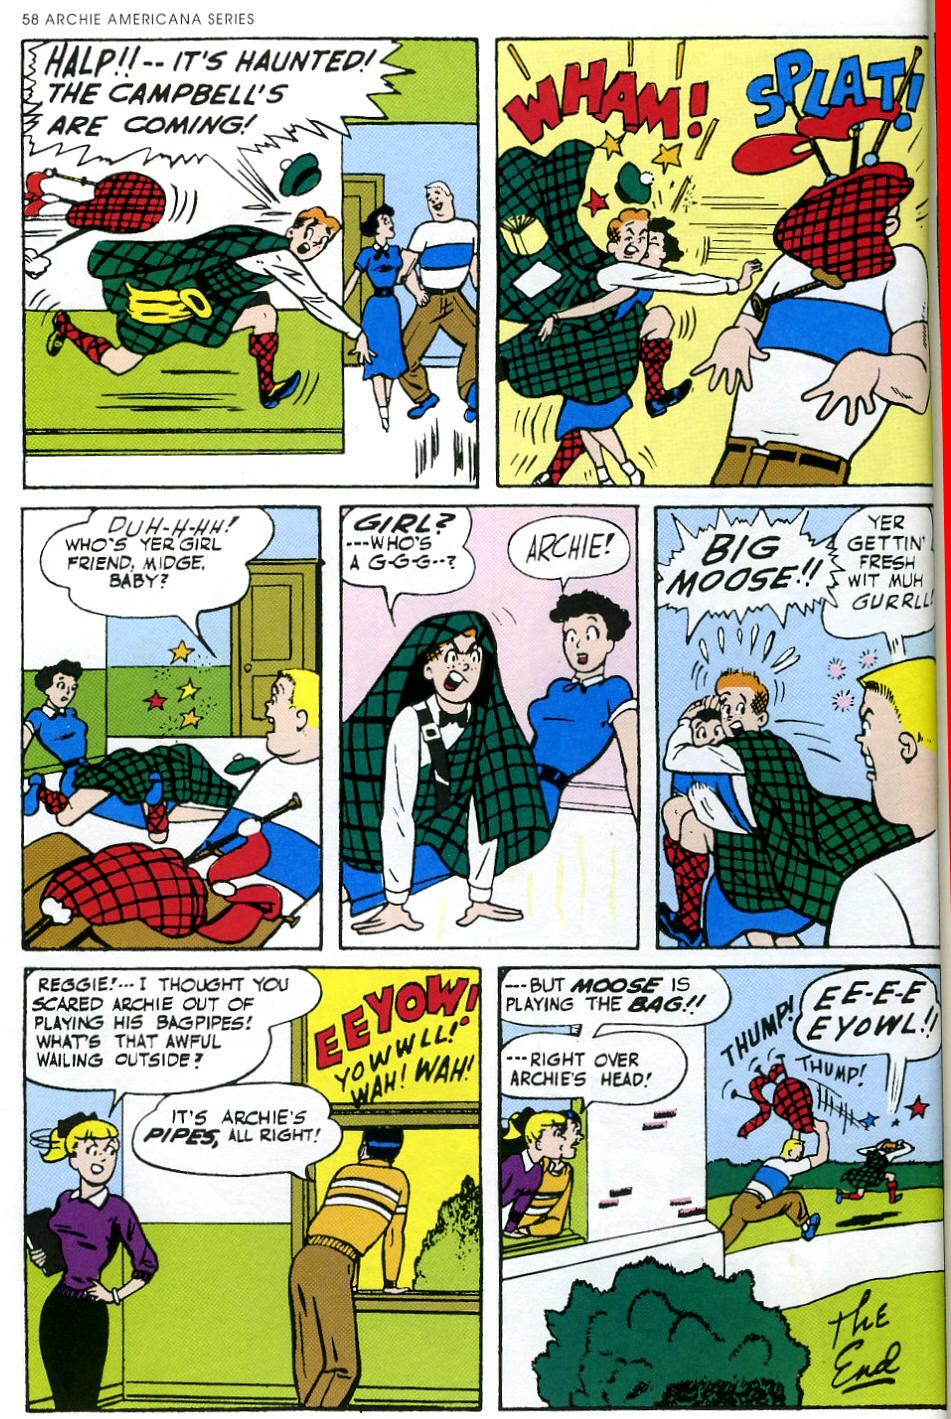 Read online Archie Americana Series comic -  Issue # TPB 2 - 60